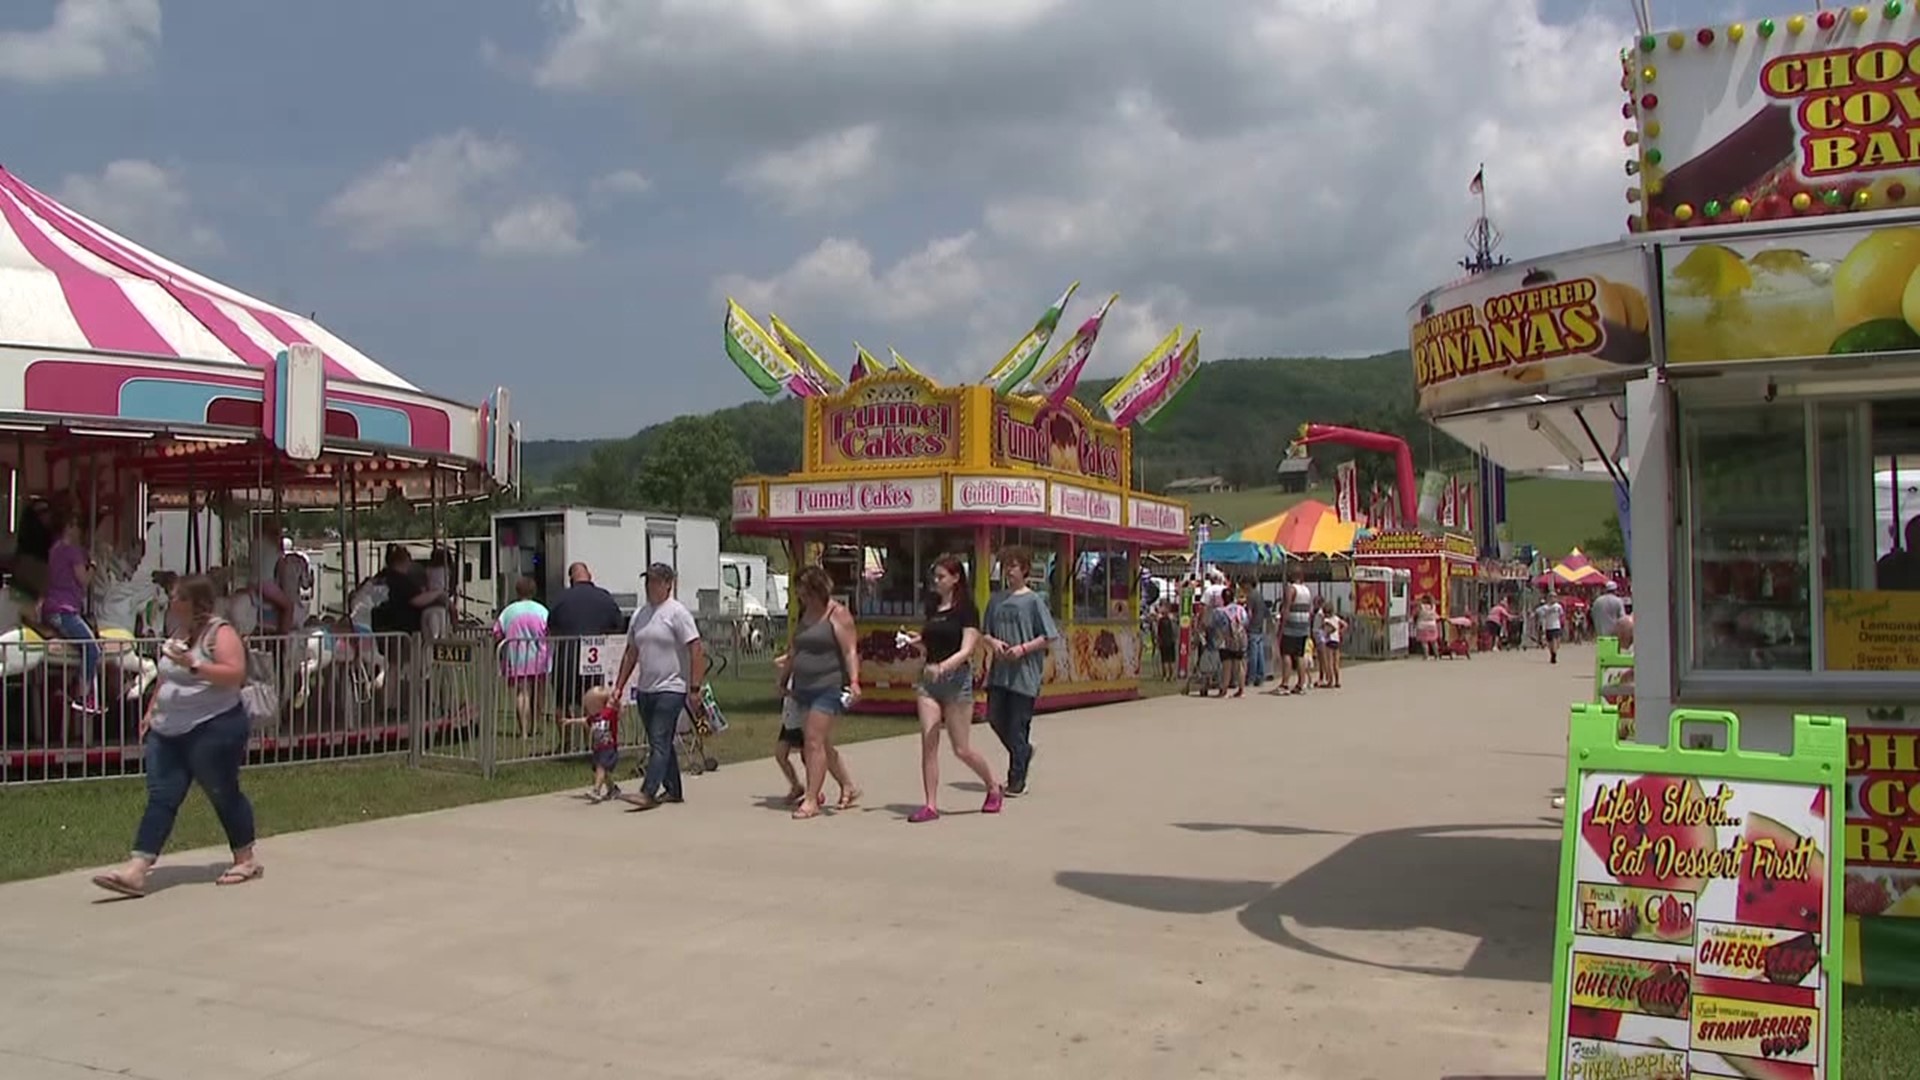 The Troy Fair runs through Saturday, and Newswatch 16's Nikki Krize spent some time there on Wednesday.